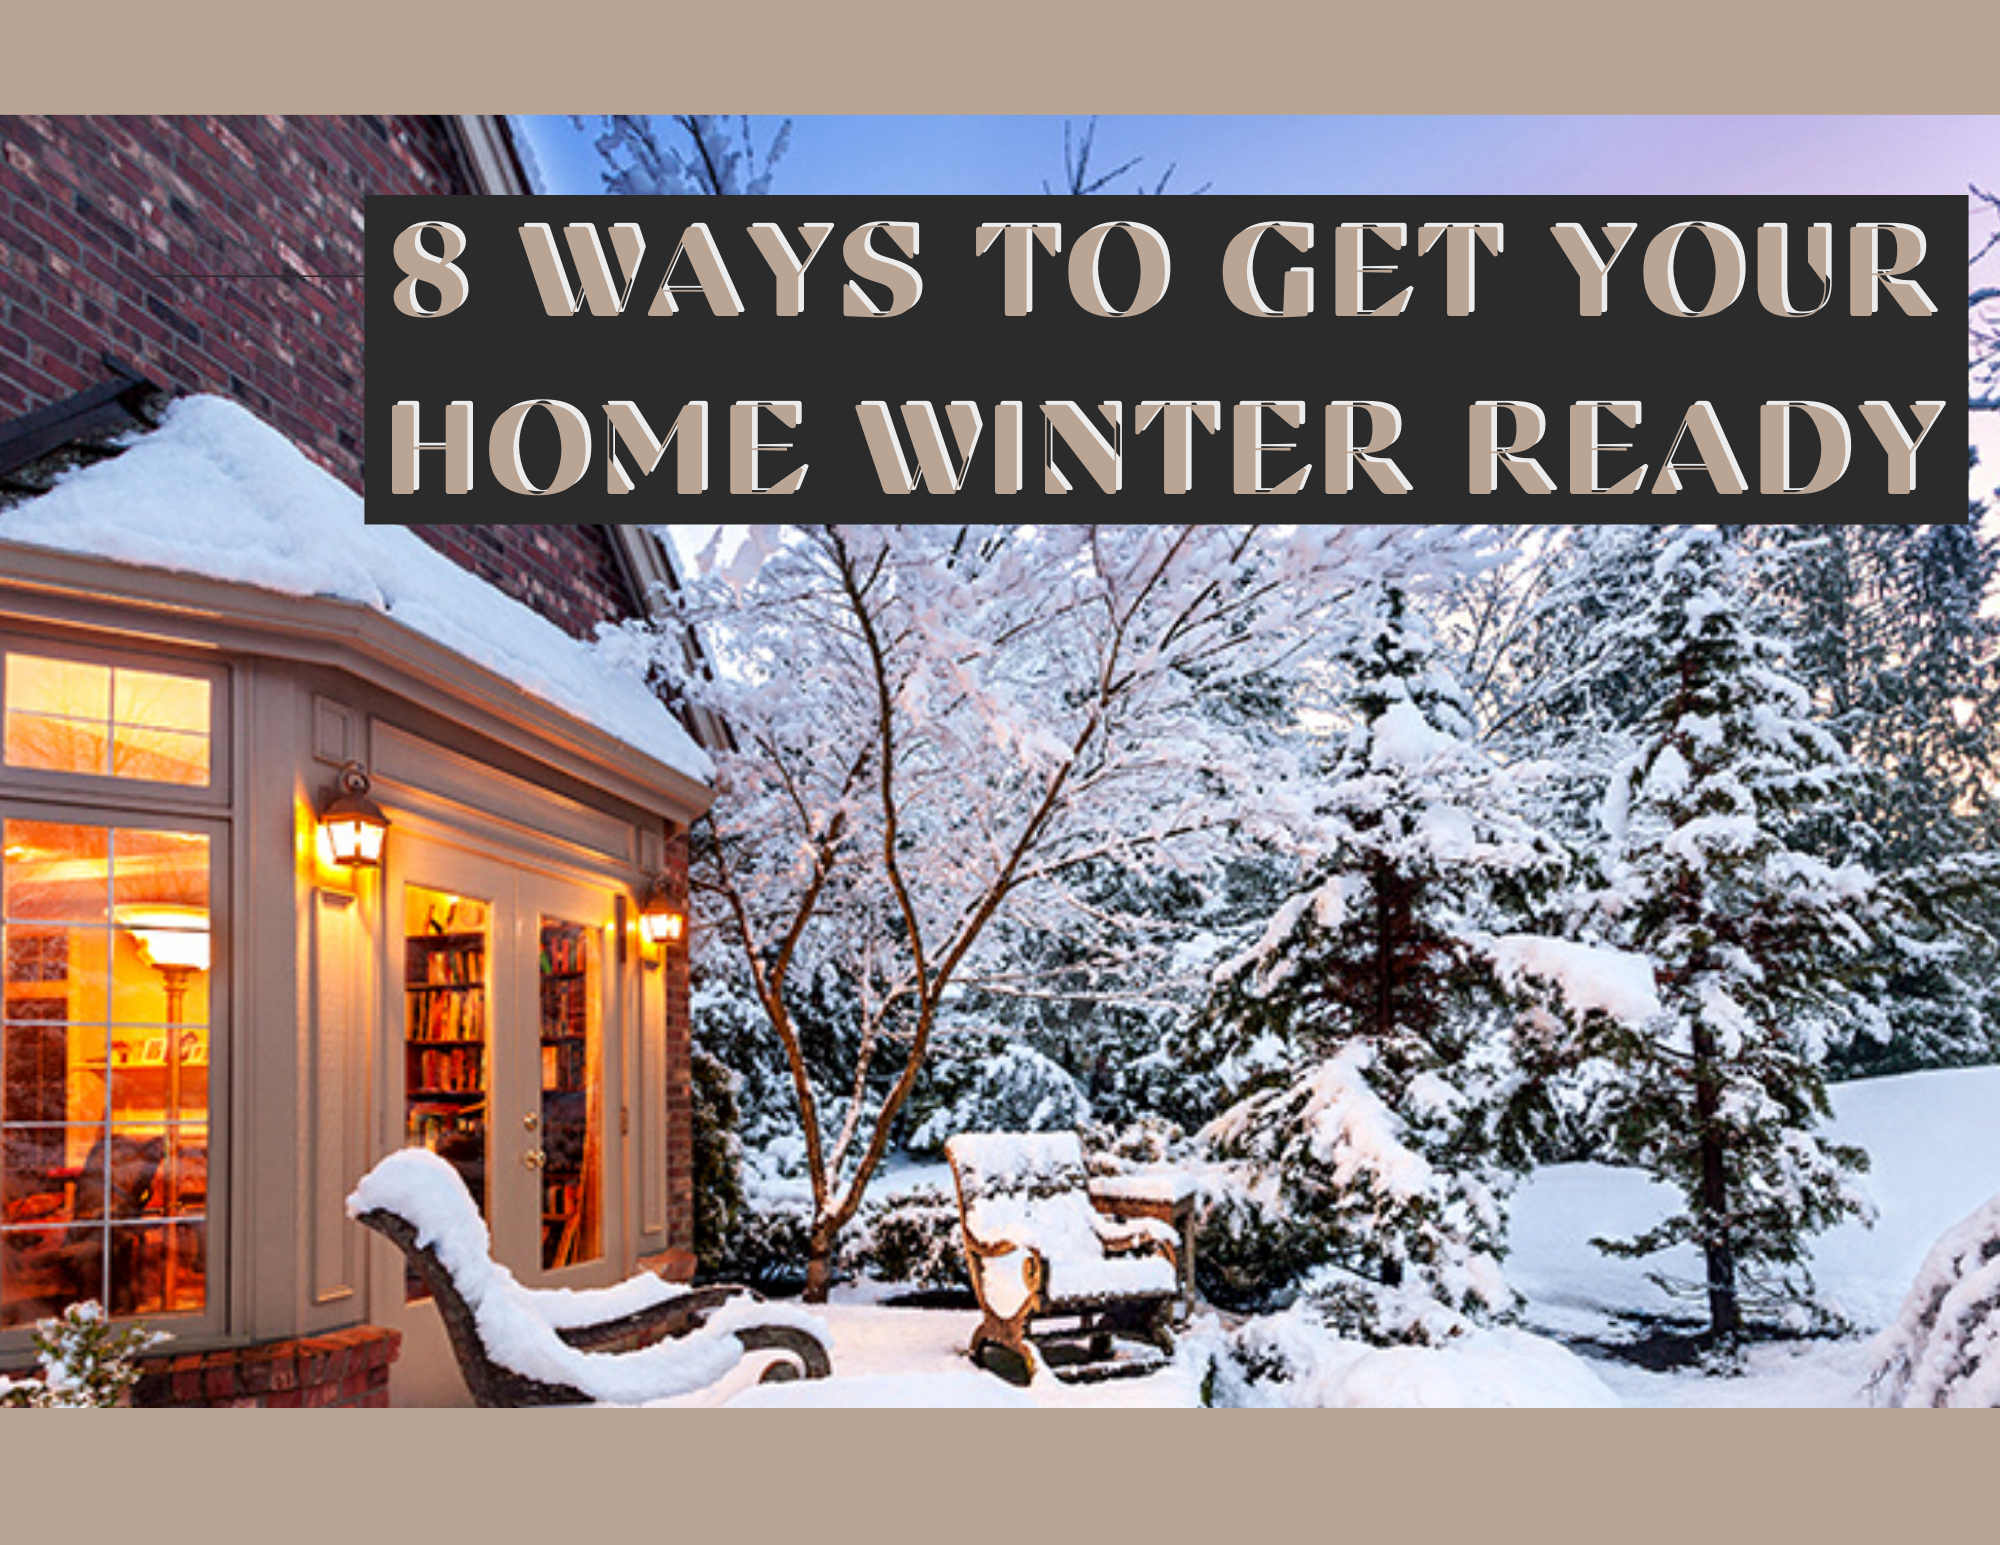 8 Ways to get your home winter ready